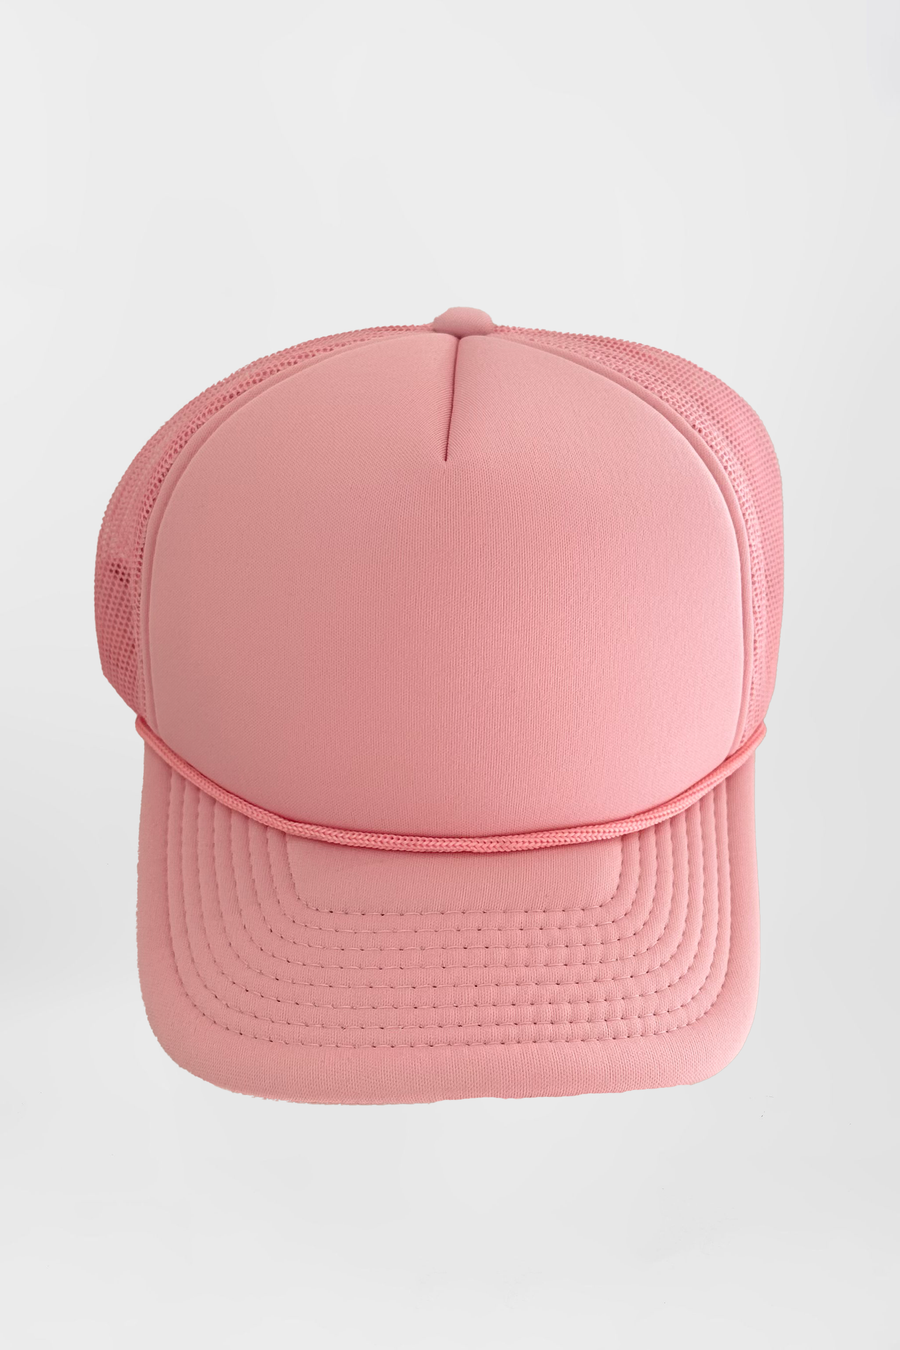 Trucker Hat Pink *Limited*Edition*